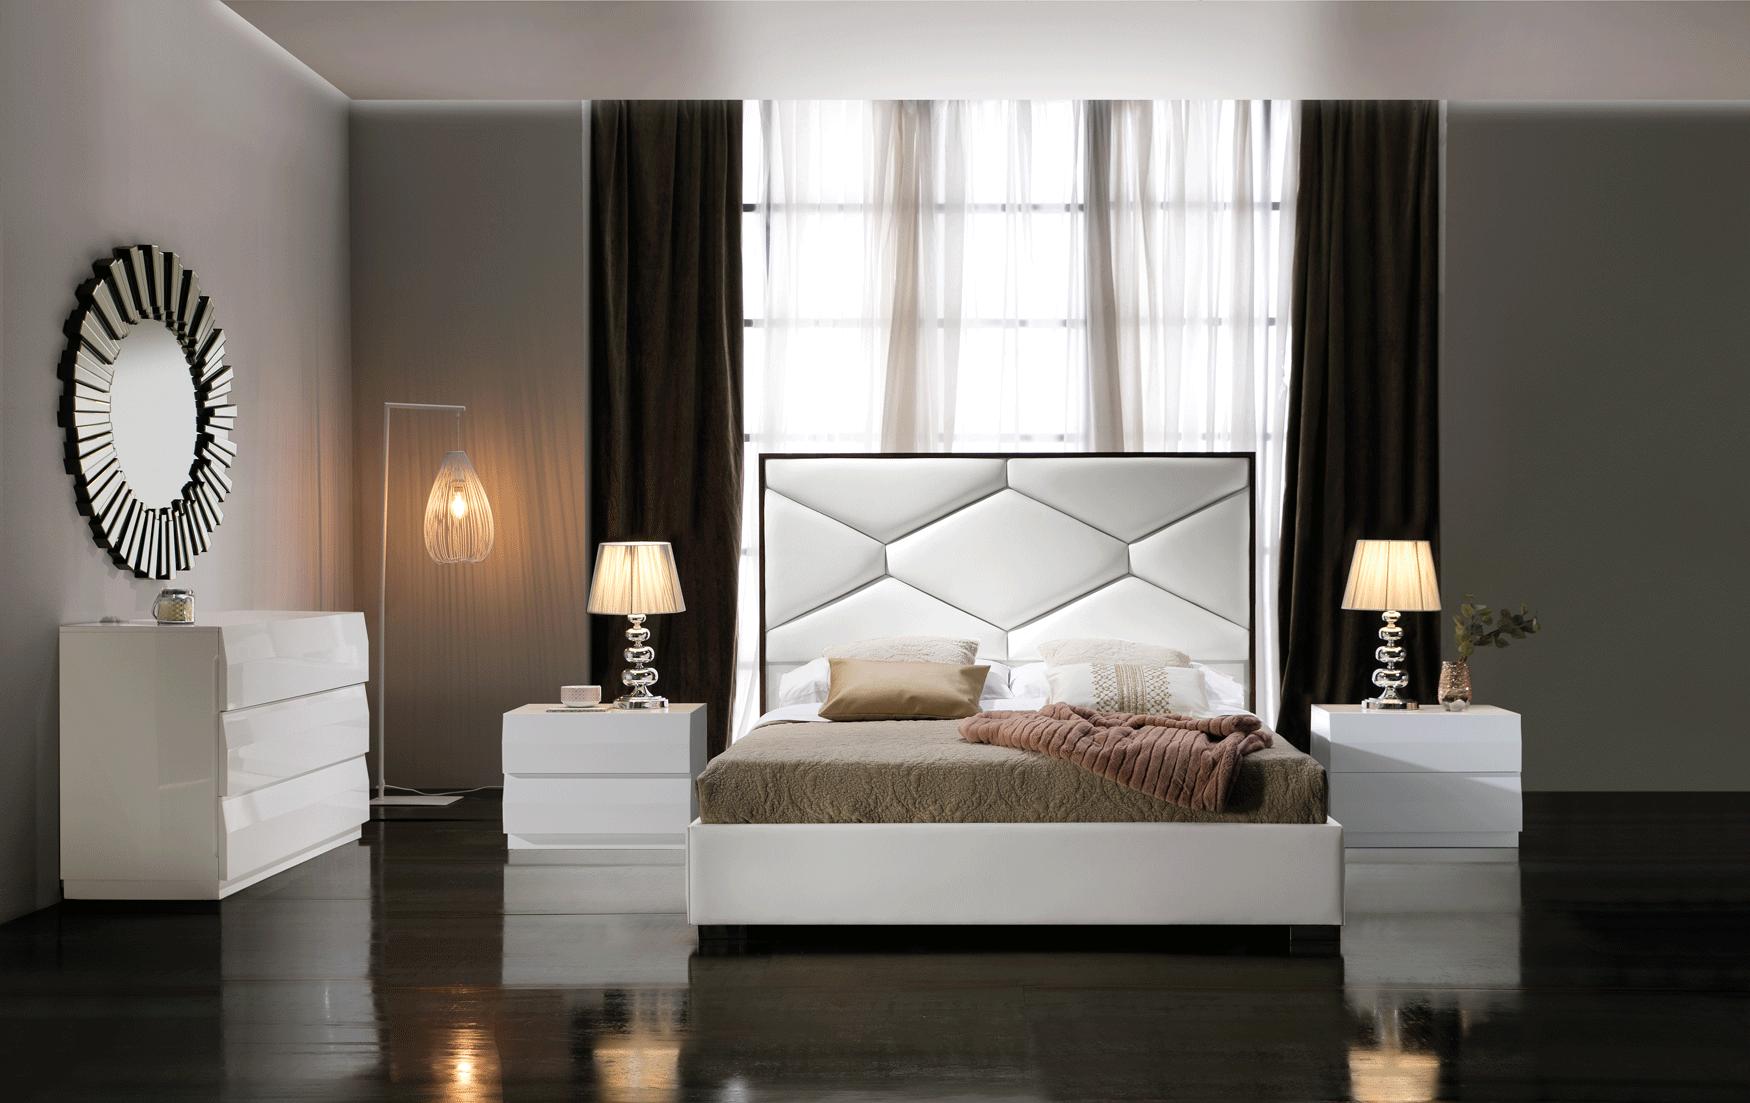 

    
White Eco Leather Queen Storage Bedroom Set 5Pcs MARTINA ESF Modern DUPEN SPAIN
